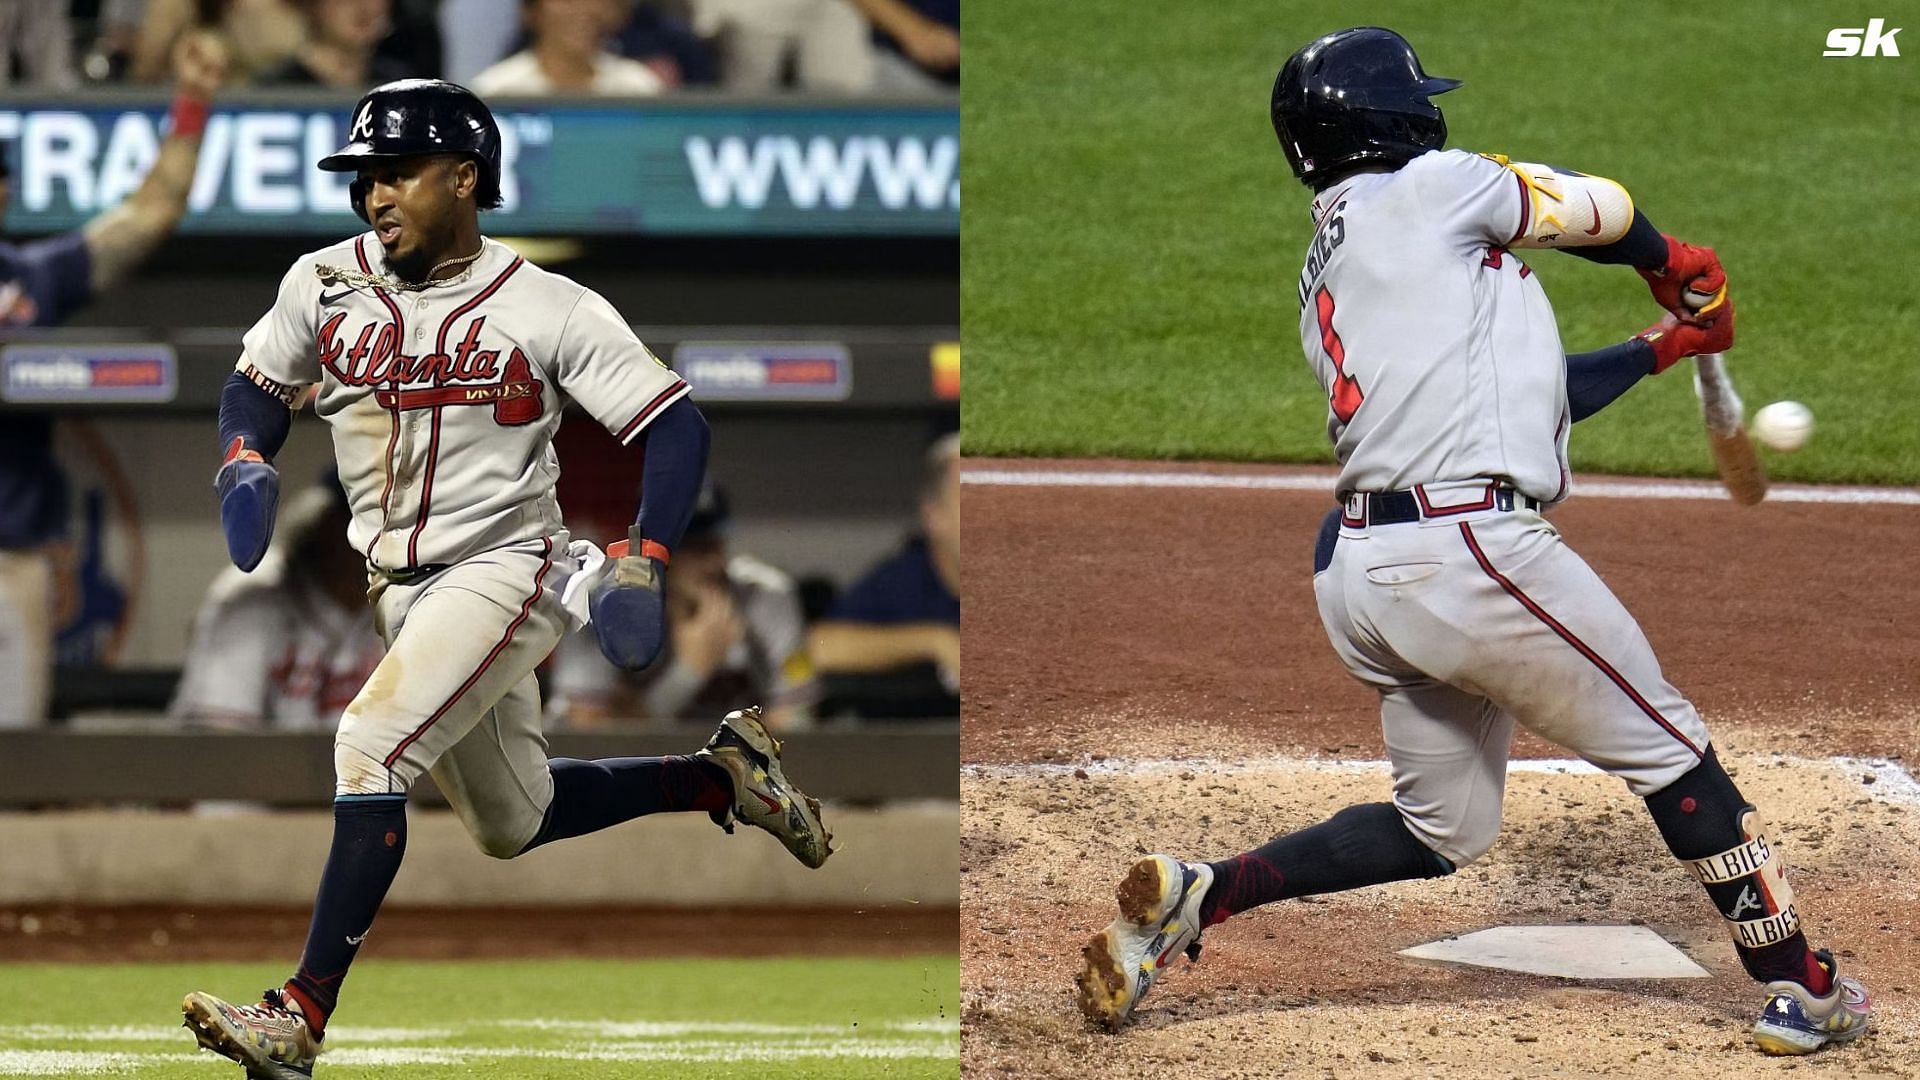 Ozzie Albies playing for Atlanta Braves scored eight runs in his two games against the Mets on Saturday.